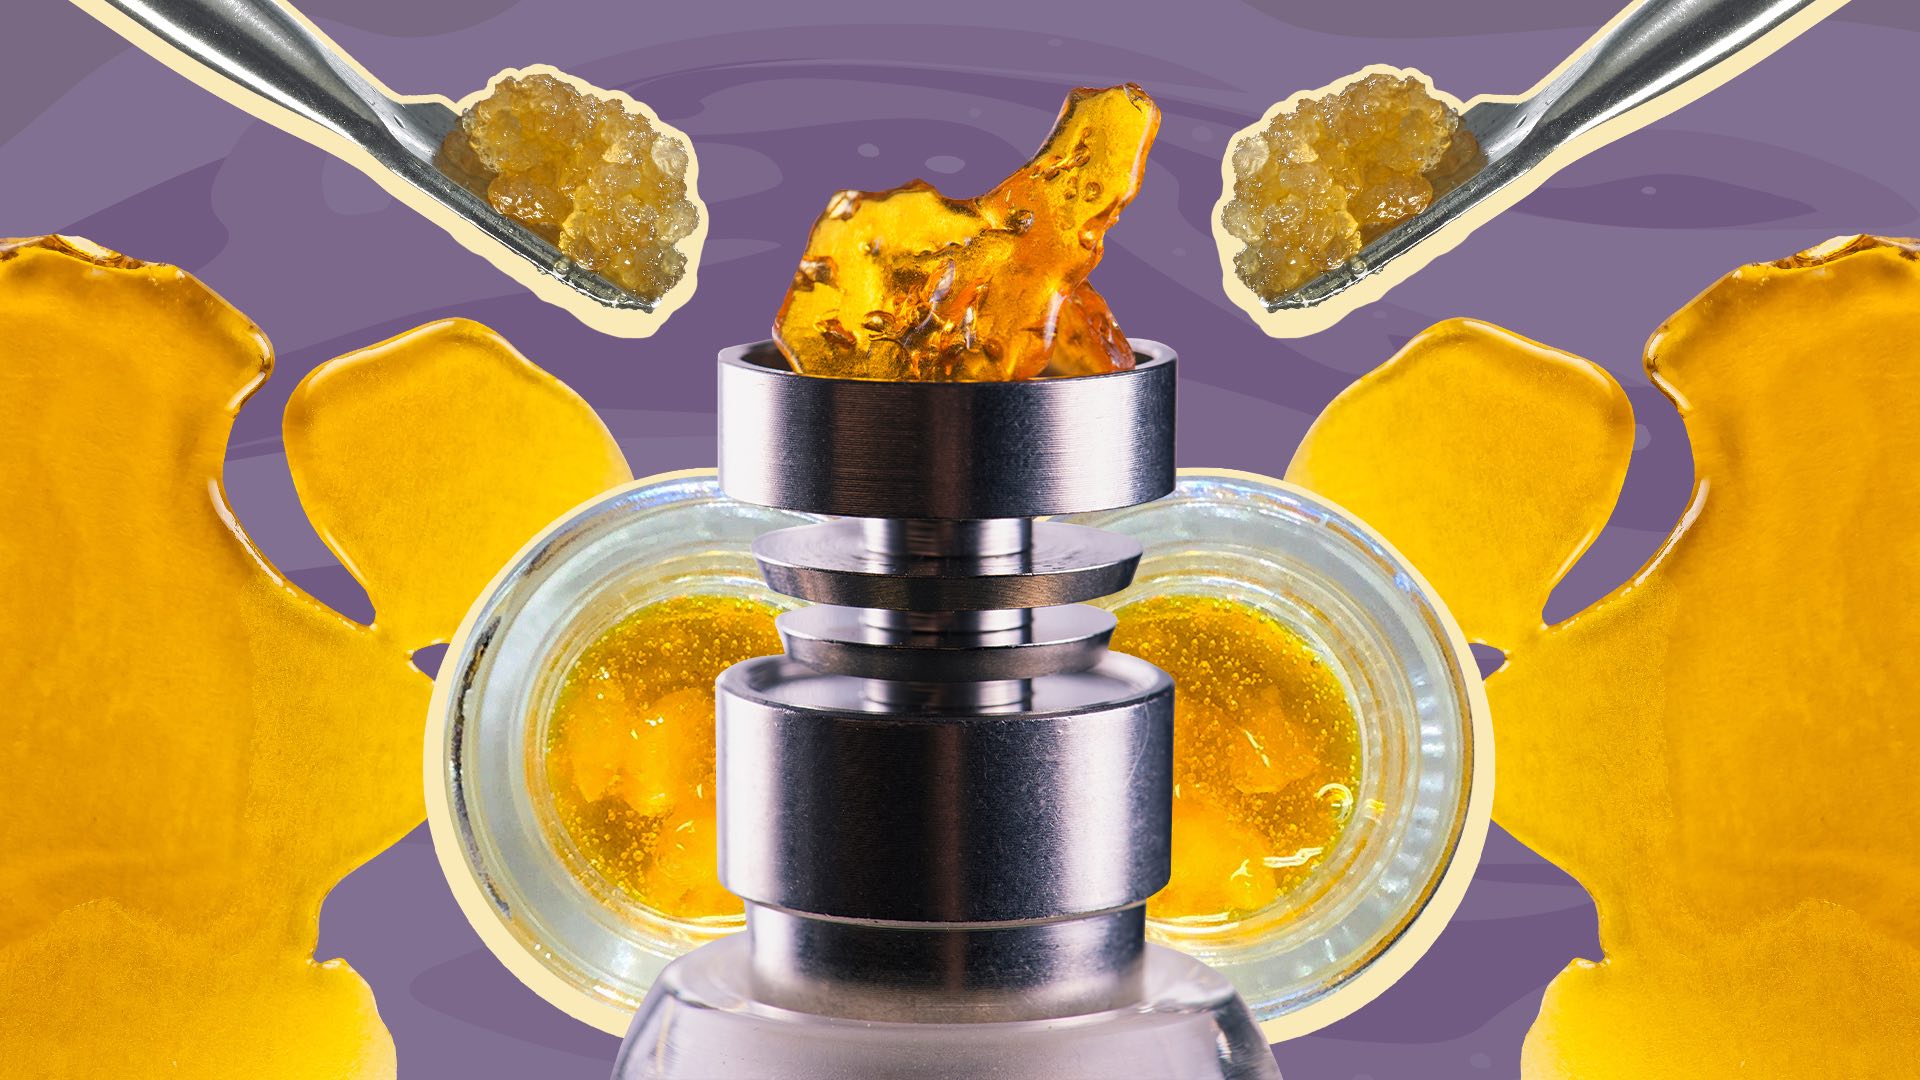 What Is Dabbing & How To Do It